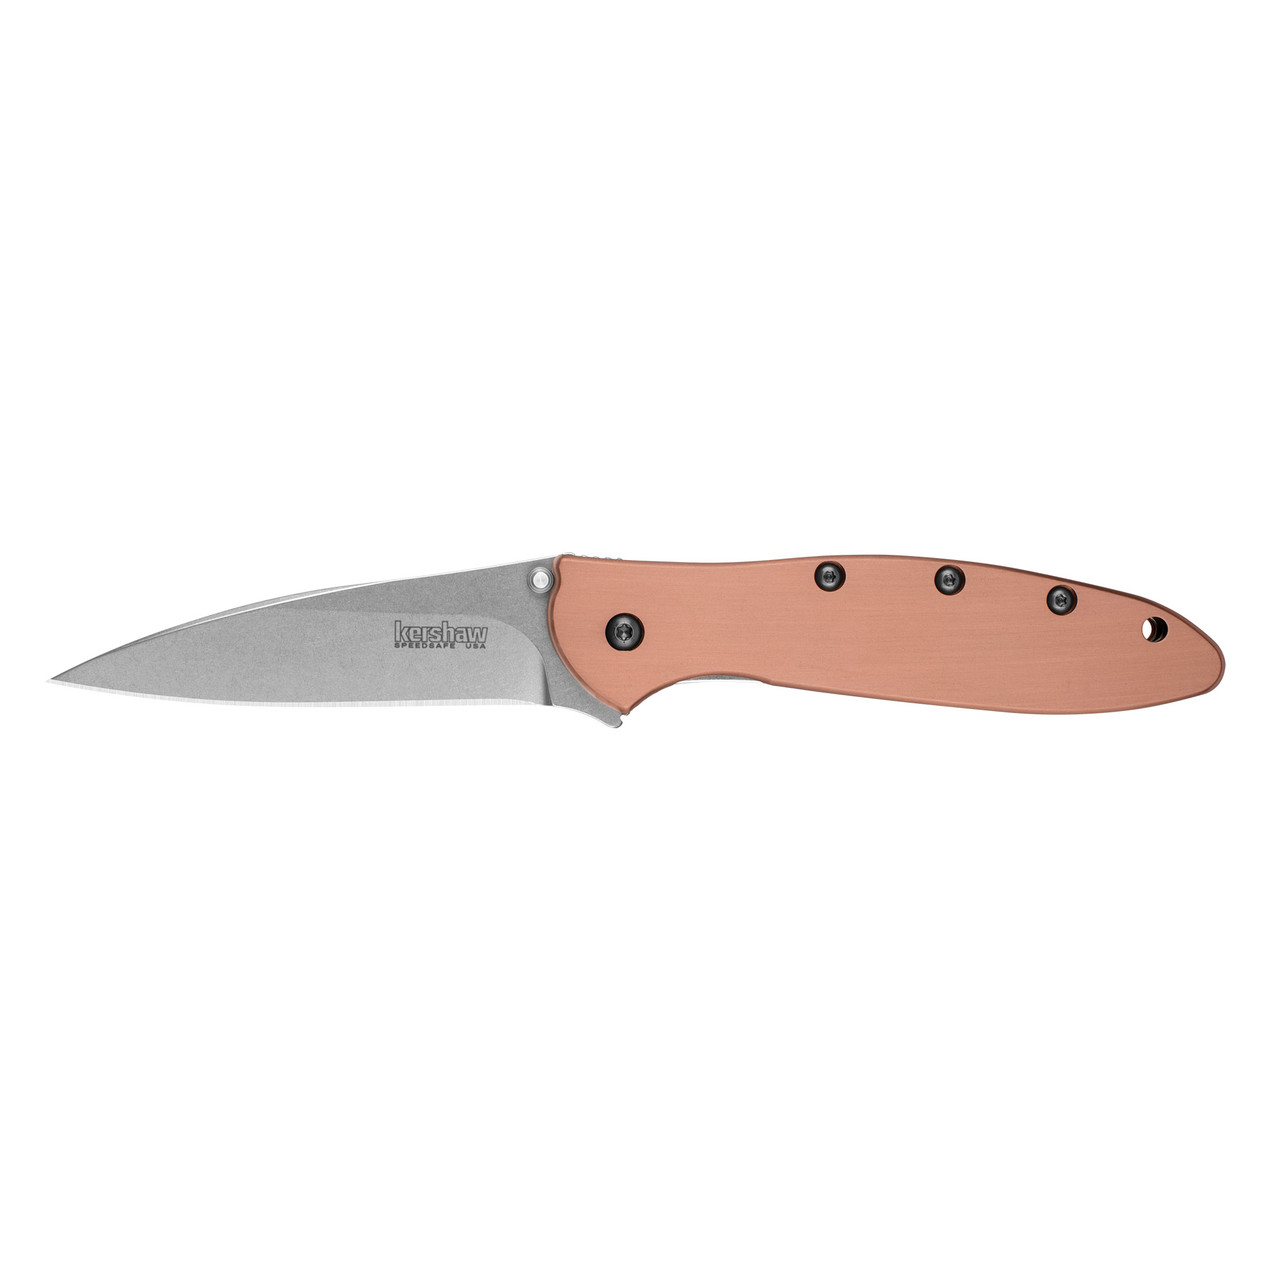 Kershaw, Leek, 3" Folding Knife/Assisted, Wharncliffe Point, Plain Edge, CPM154 Stonewashed, Copper Handle Scales